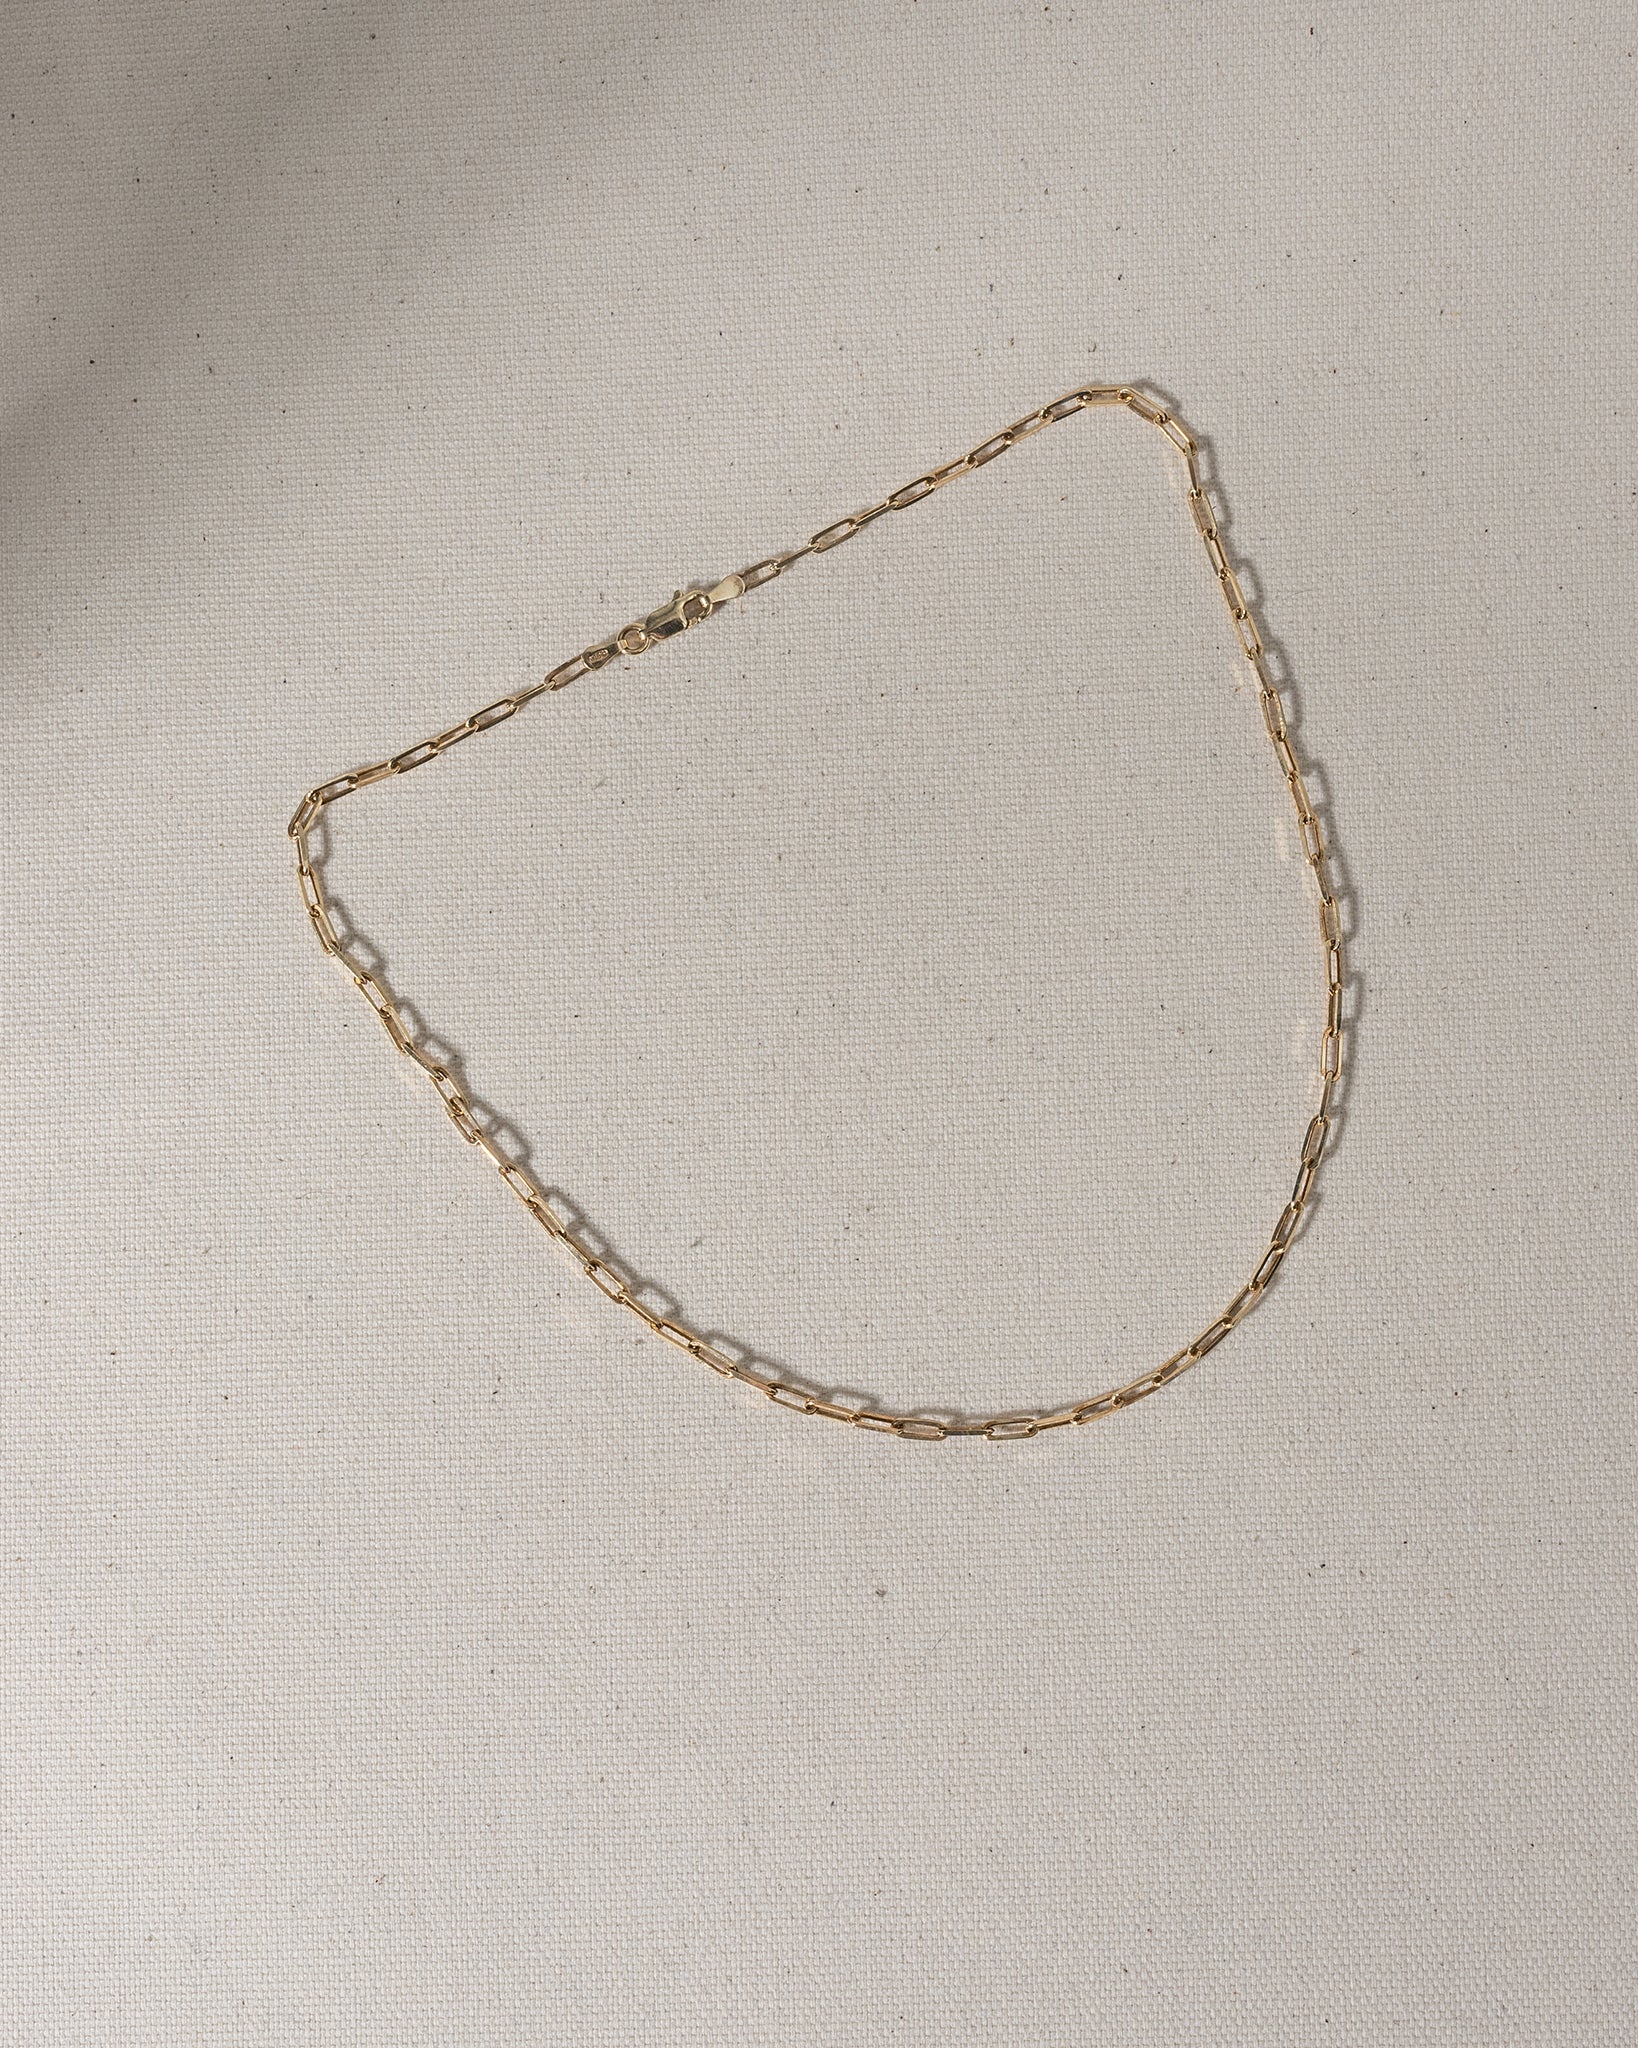 Gold chain with large oval links laying on canvas